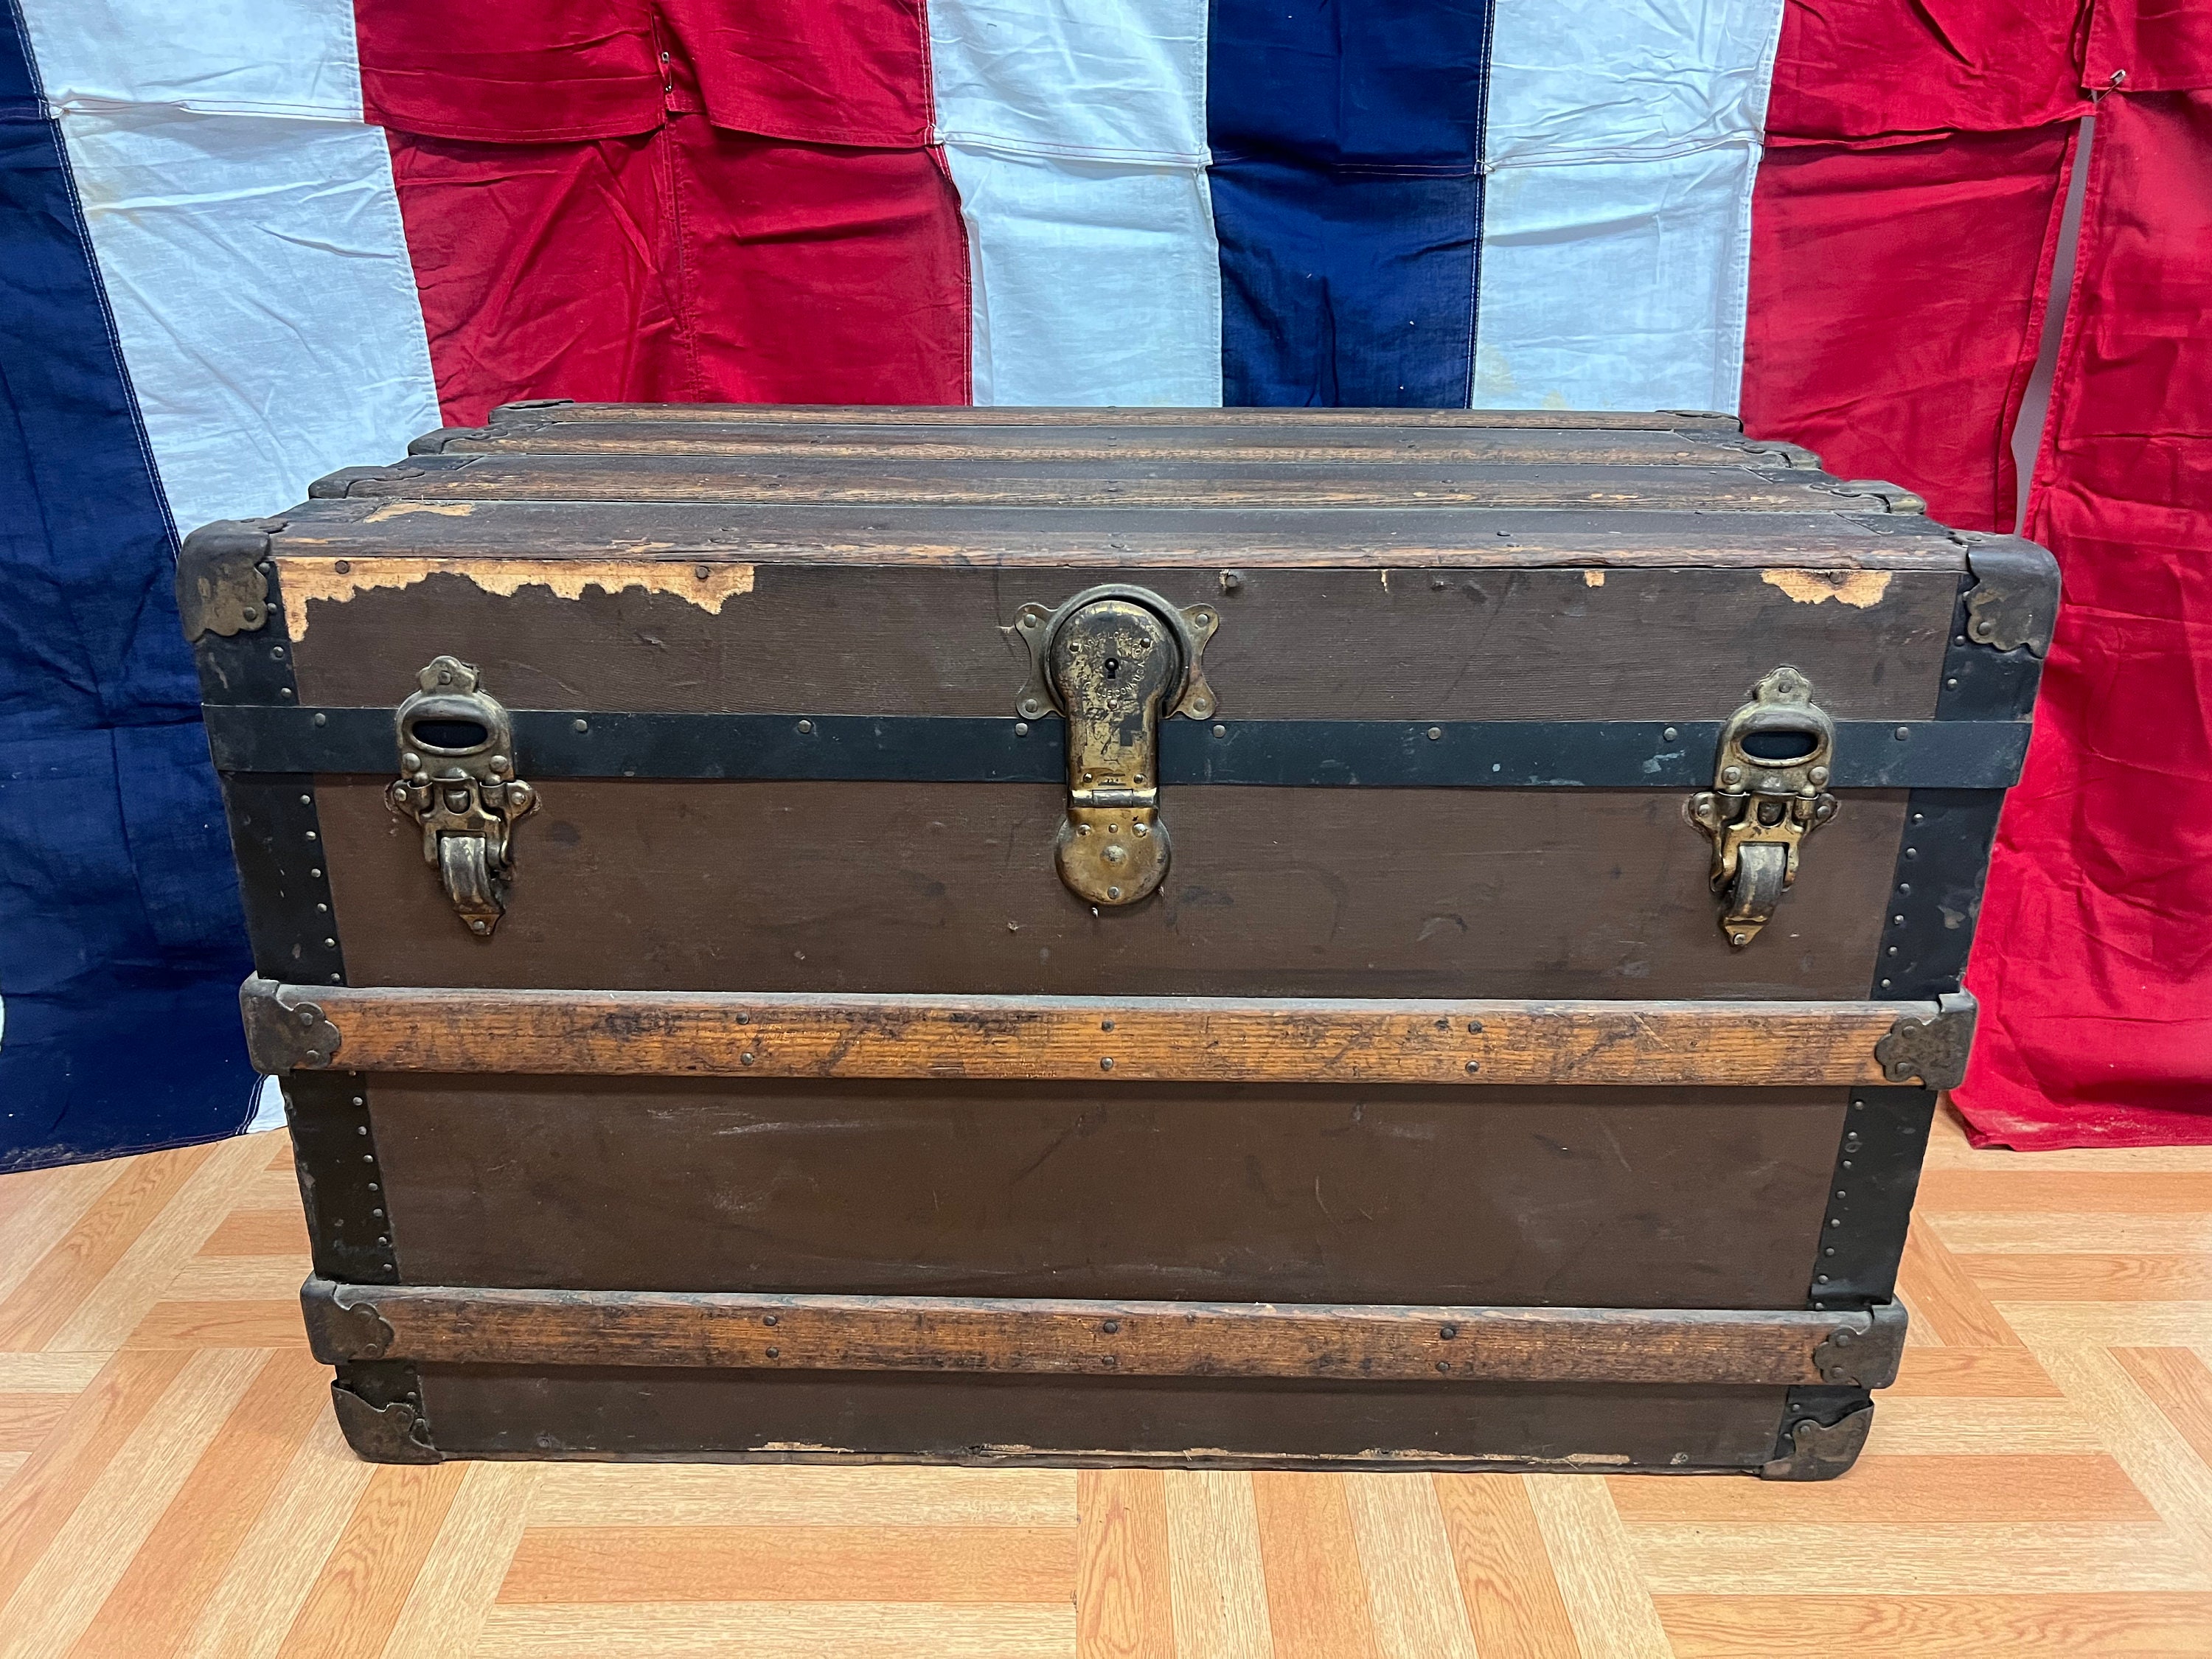 1940s Vintage Military Foot Locker Trunk With Insert Tray